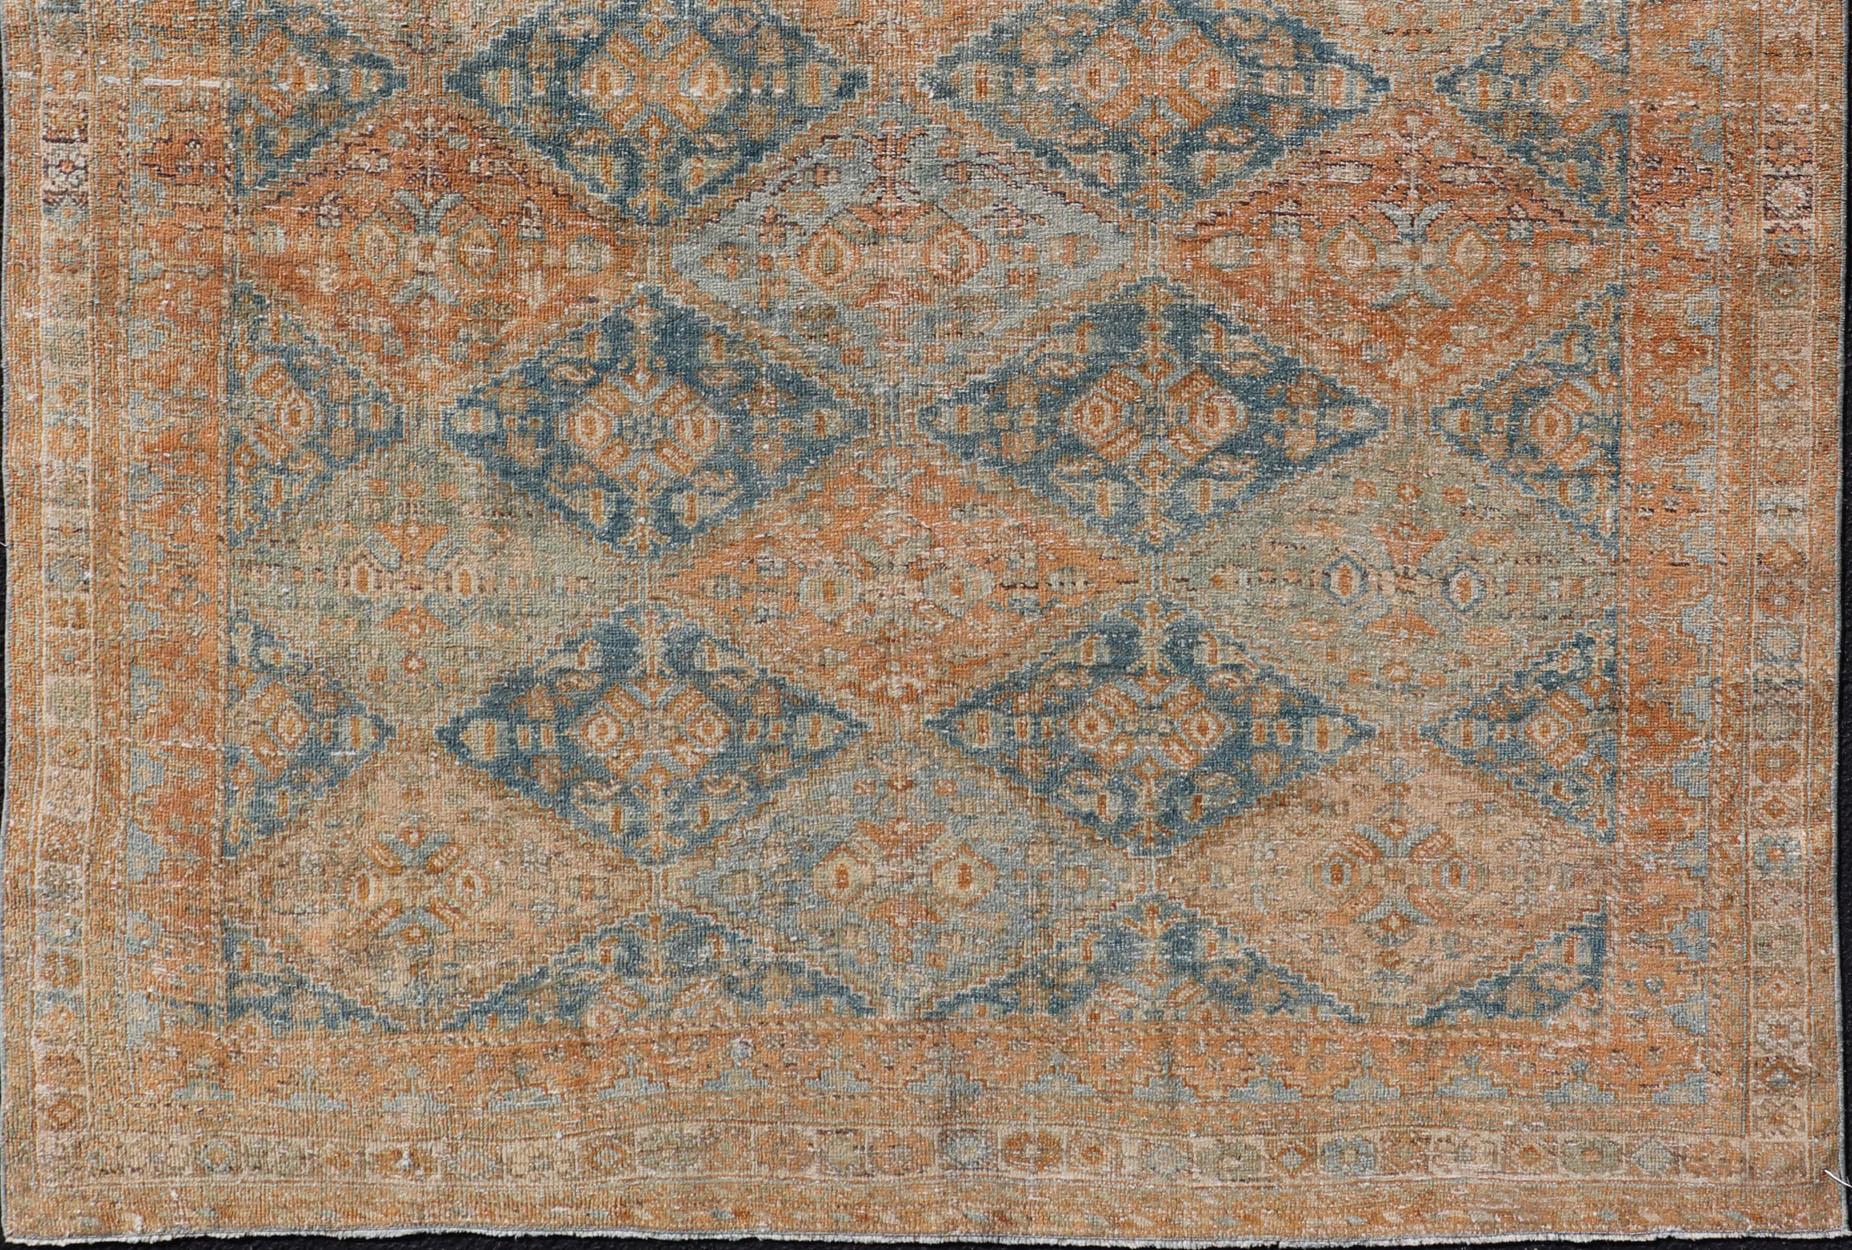 Antique Persian Kurdish Rug with All-Over Geometric Medallion in Orange & Blue  For Sale 2